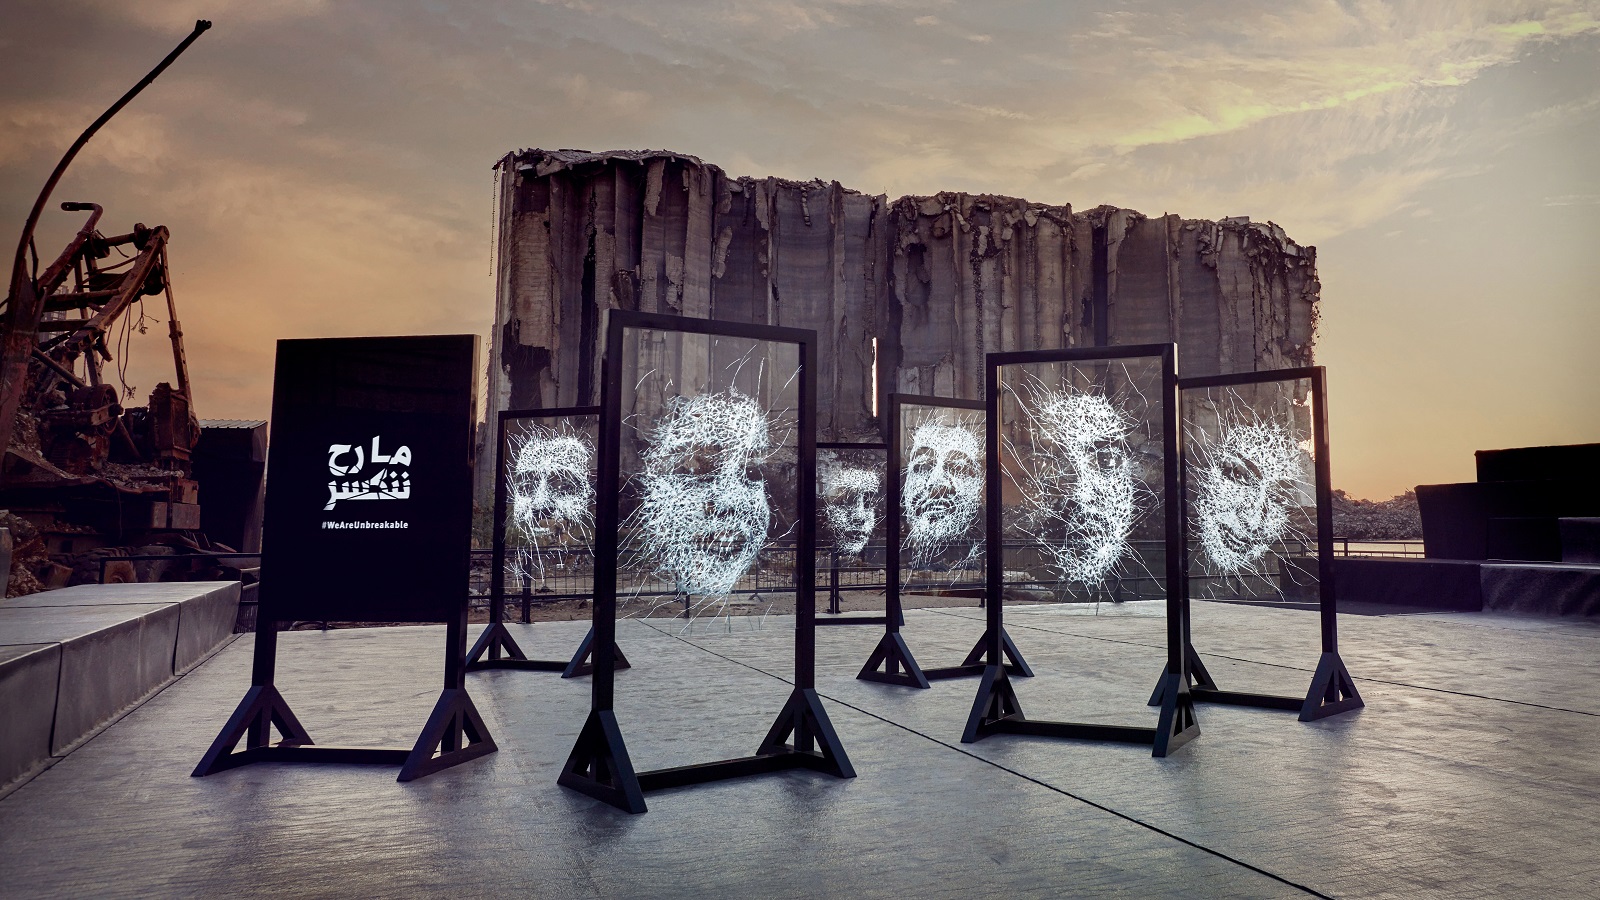 Beirut Explosion Victims Have Their Portraits Depicted in Glass